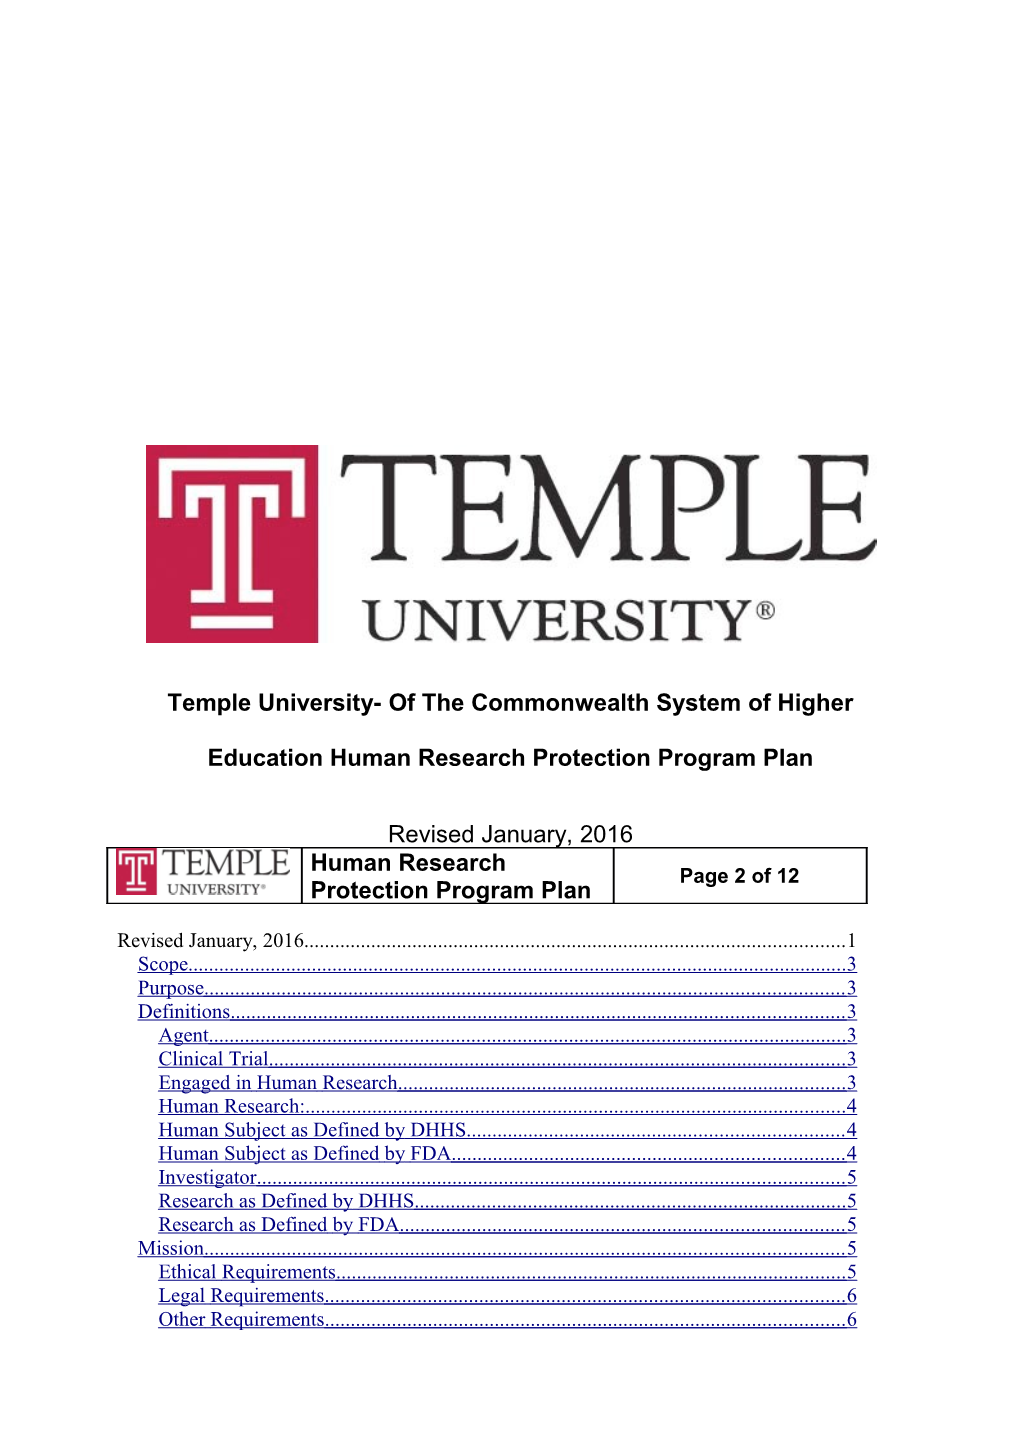 Temple University- of the Commonwealth System of Higher Education Human Research Protection